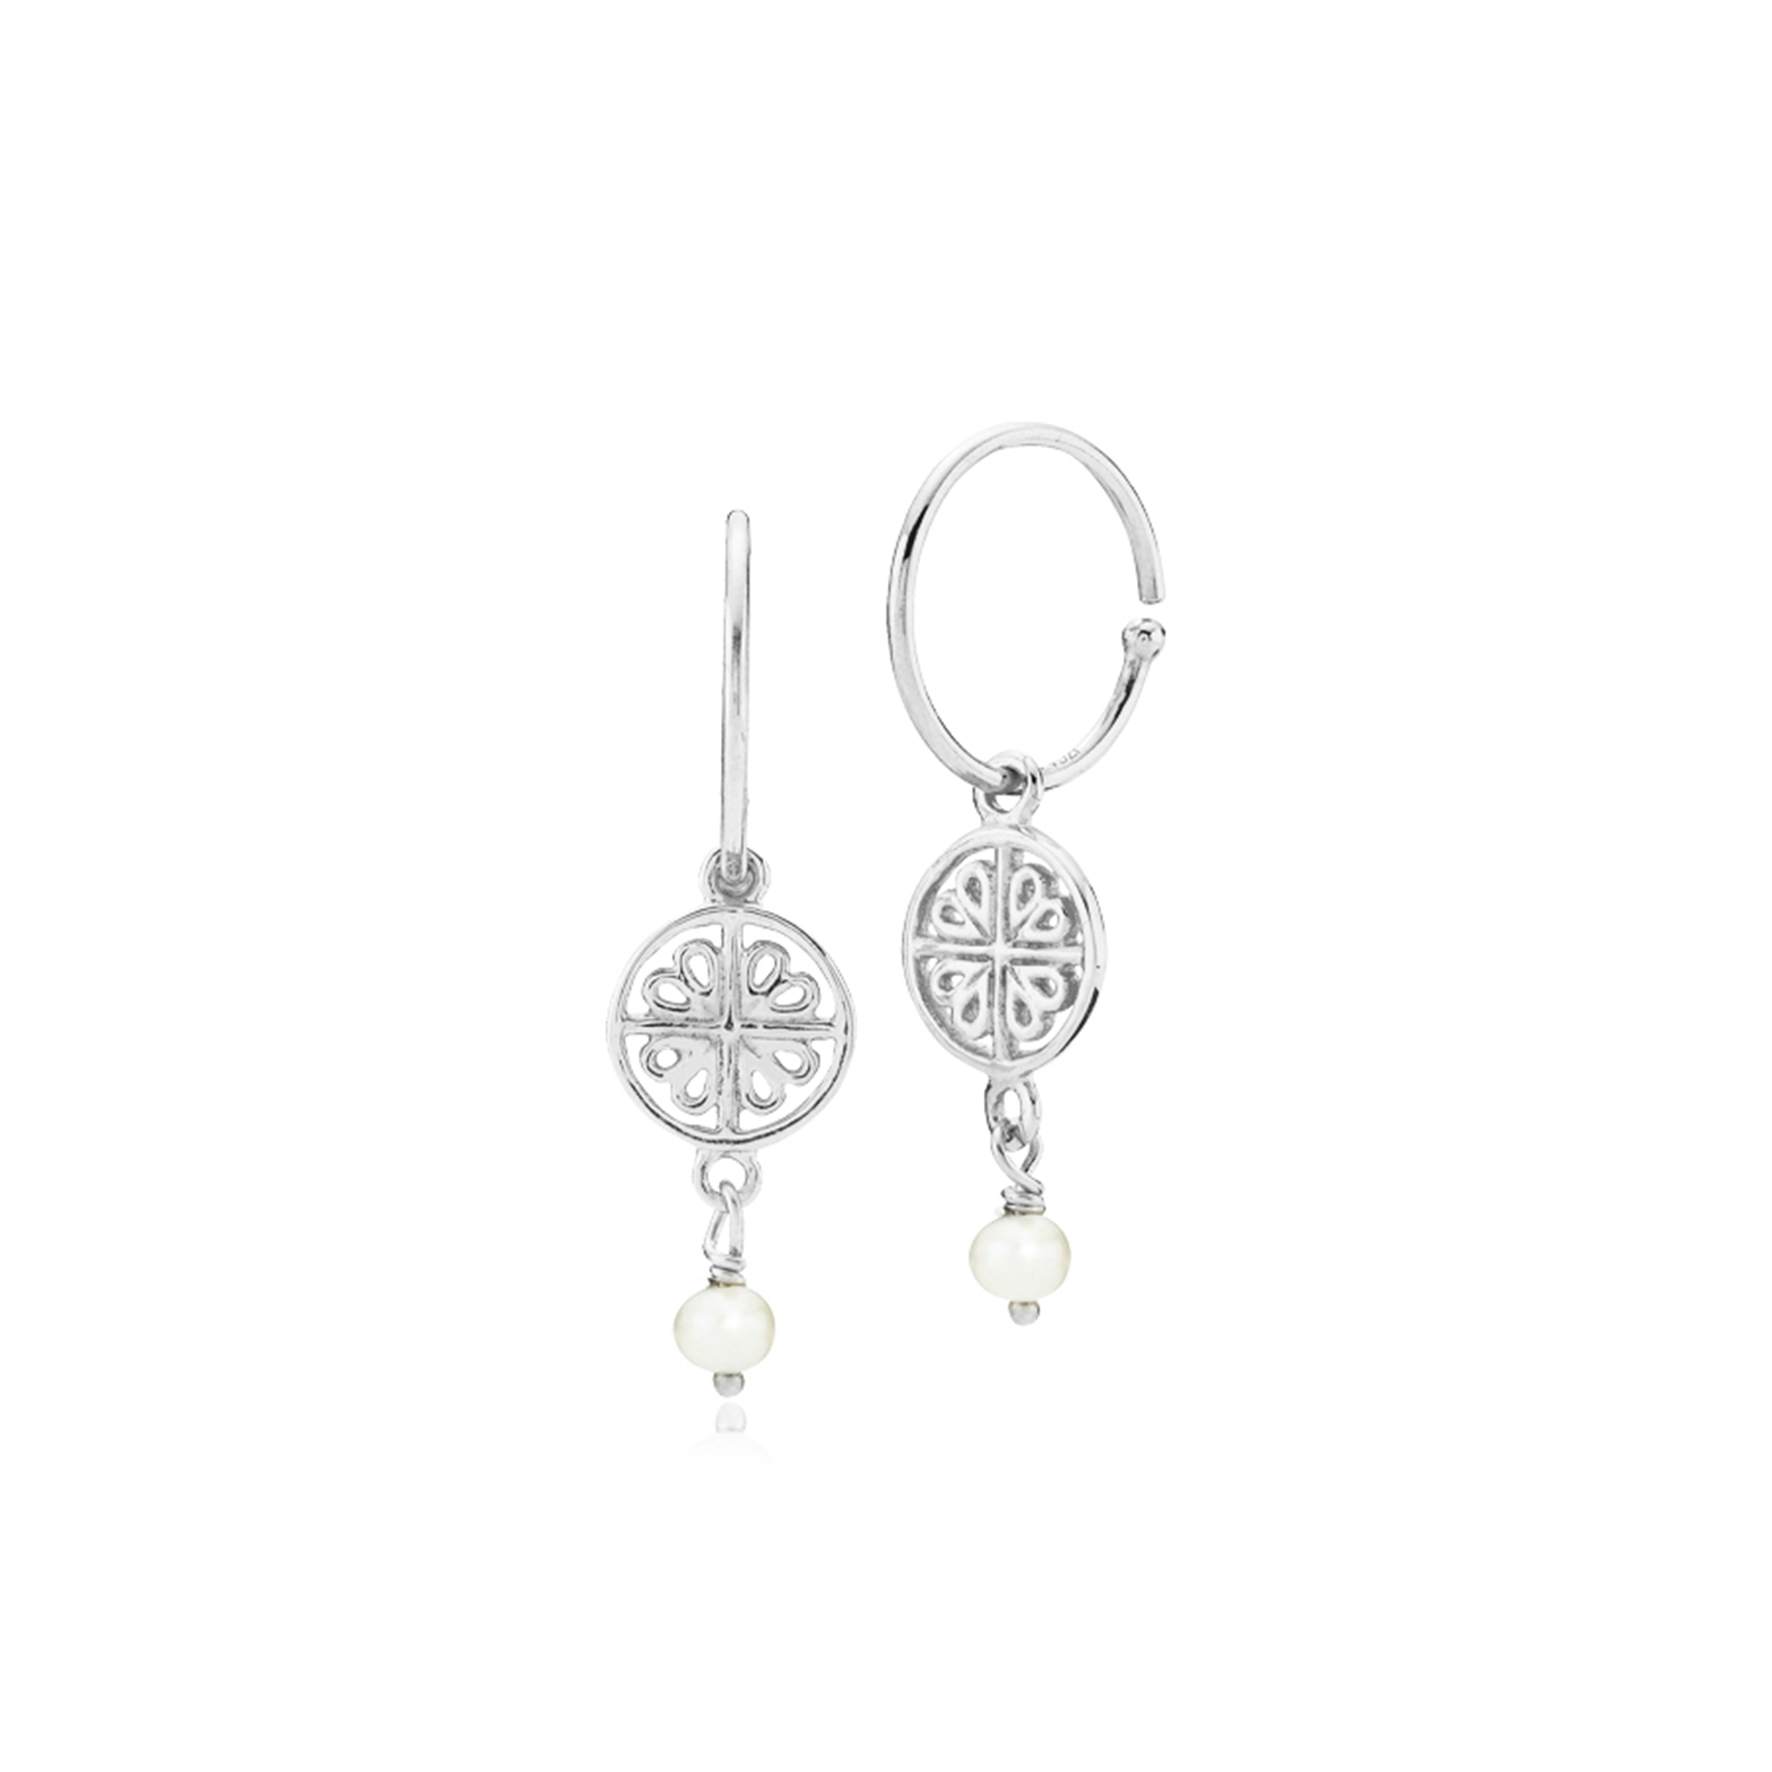 Balance Creol Earrings With Pearl from Sistie in Silver Sterling 925|Freshwater Pearl|Blank